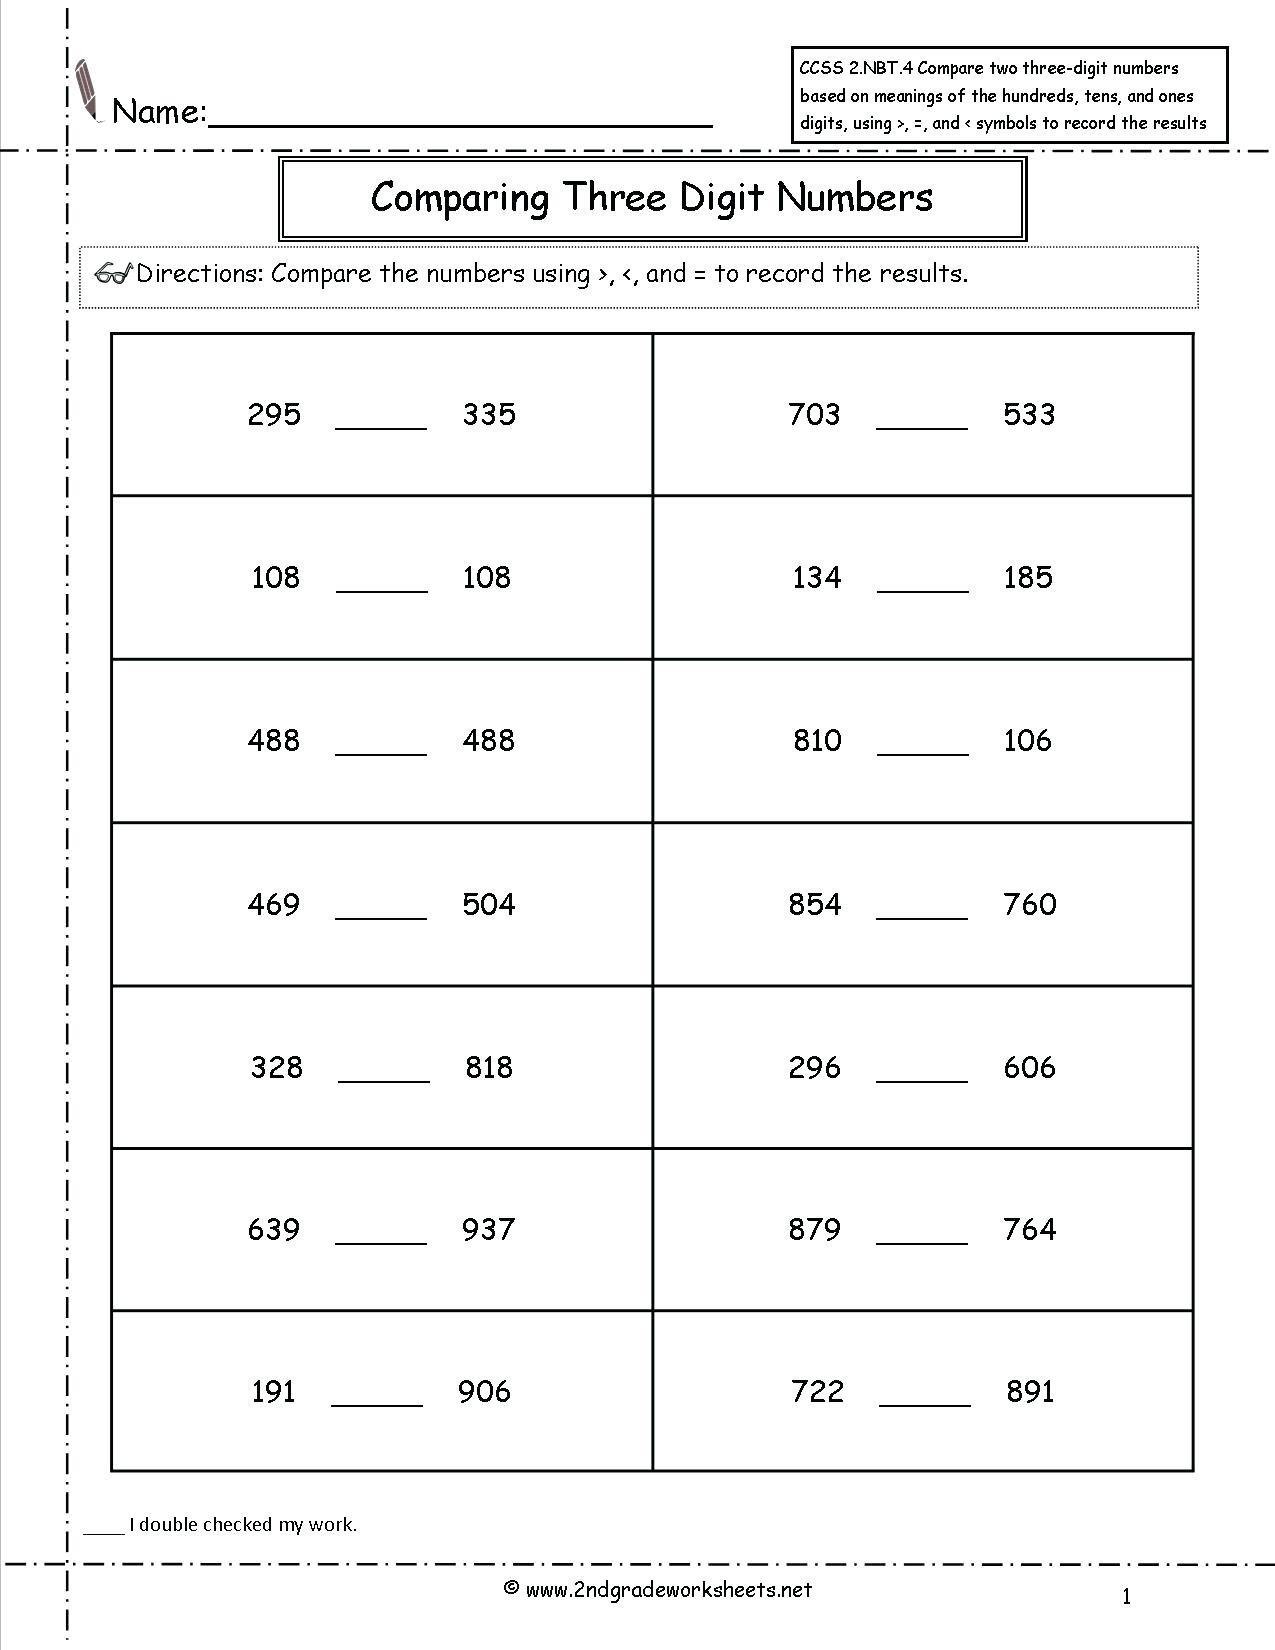 Free Math Worksheets Second Grade 2 Subtraction Subtracting 1 Digit From 3 Digit Missing Number